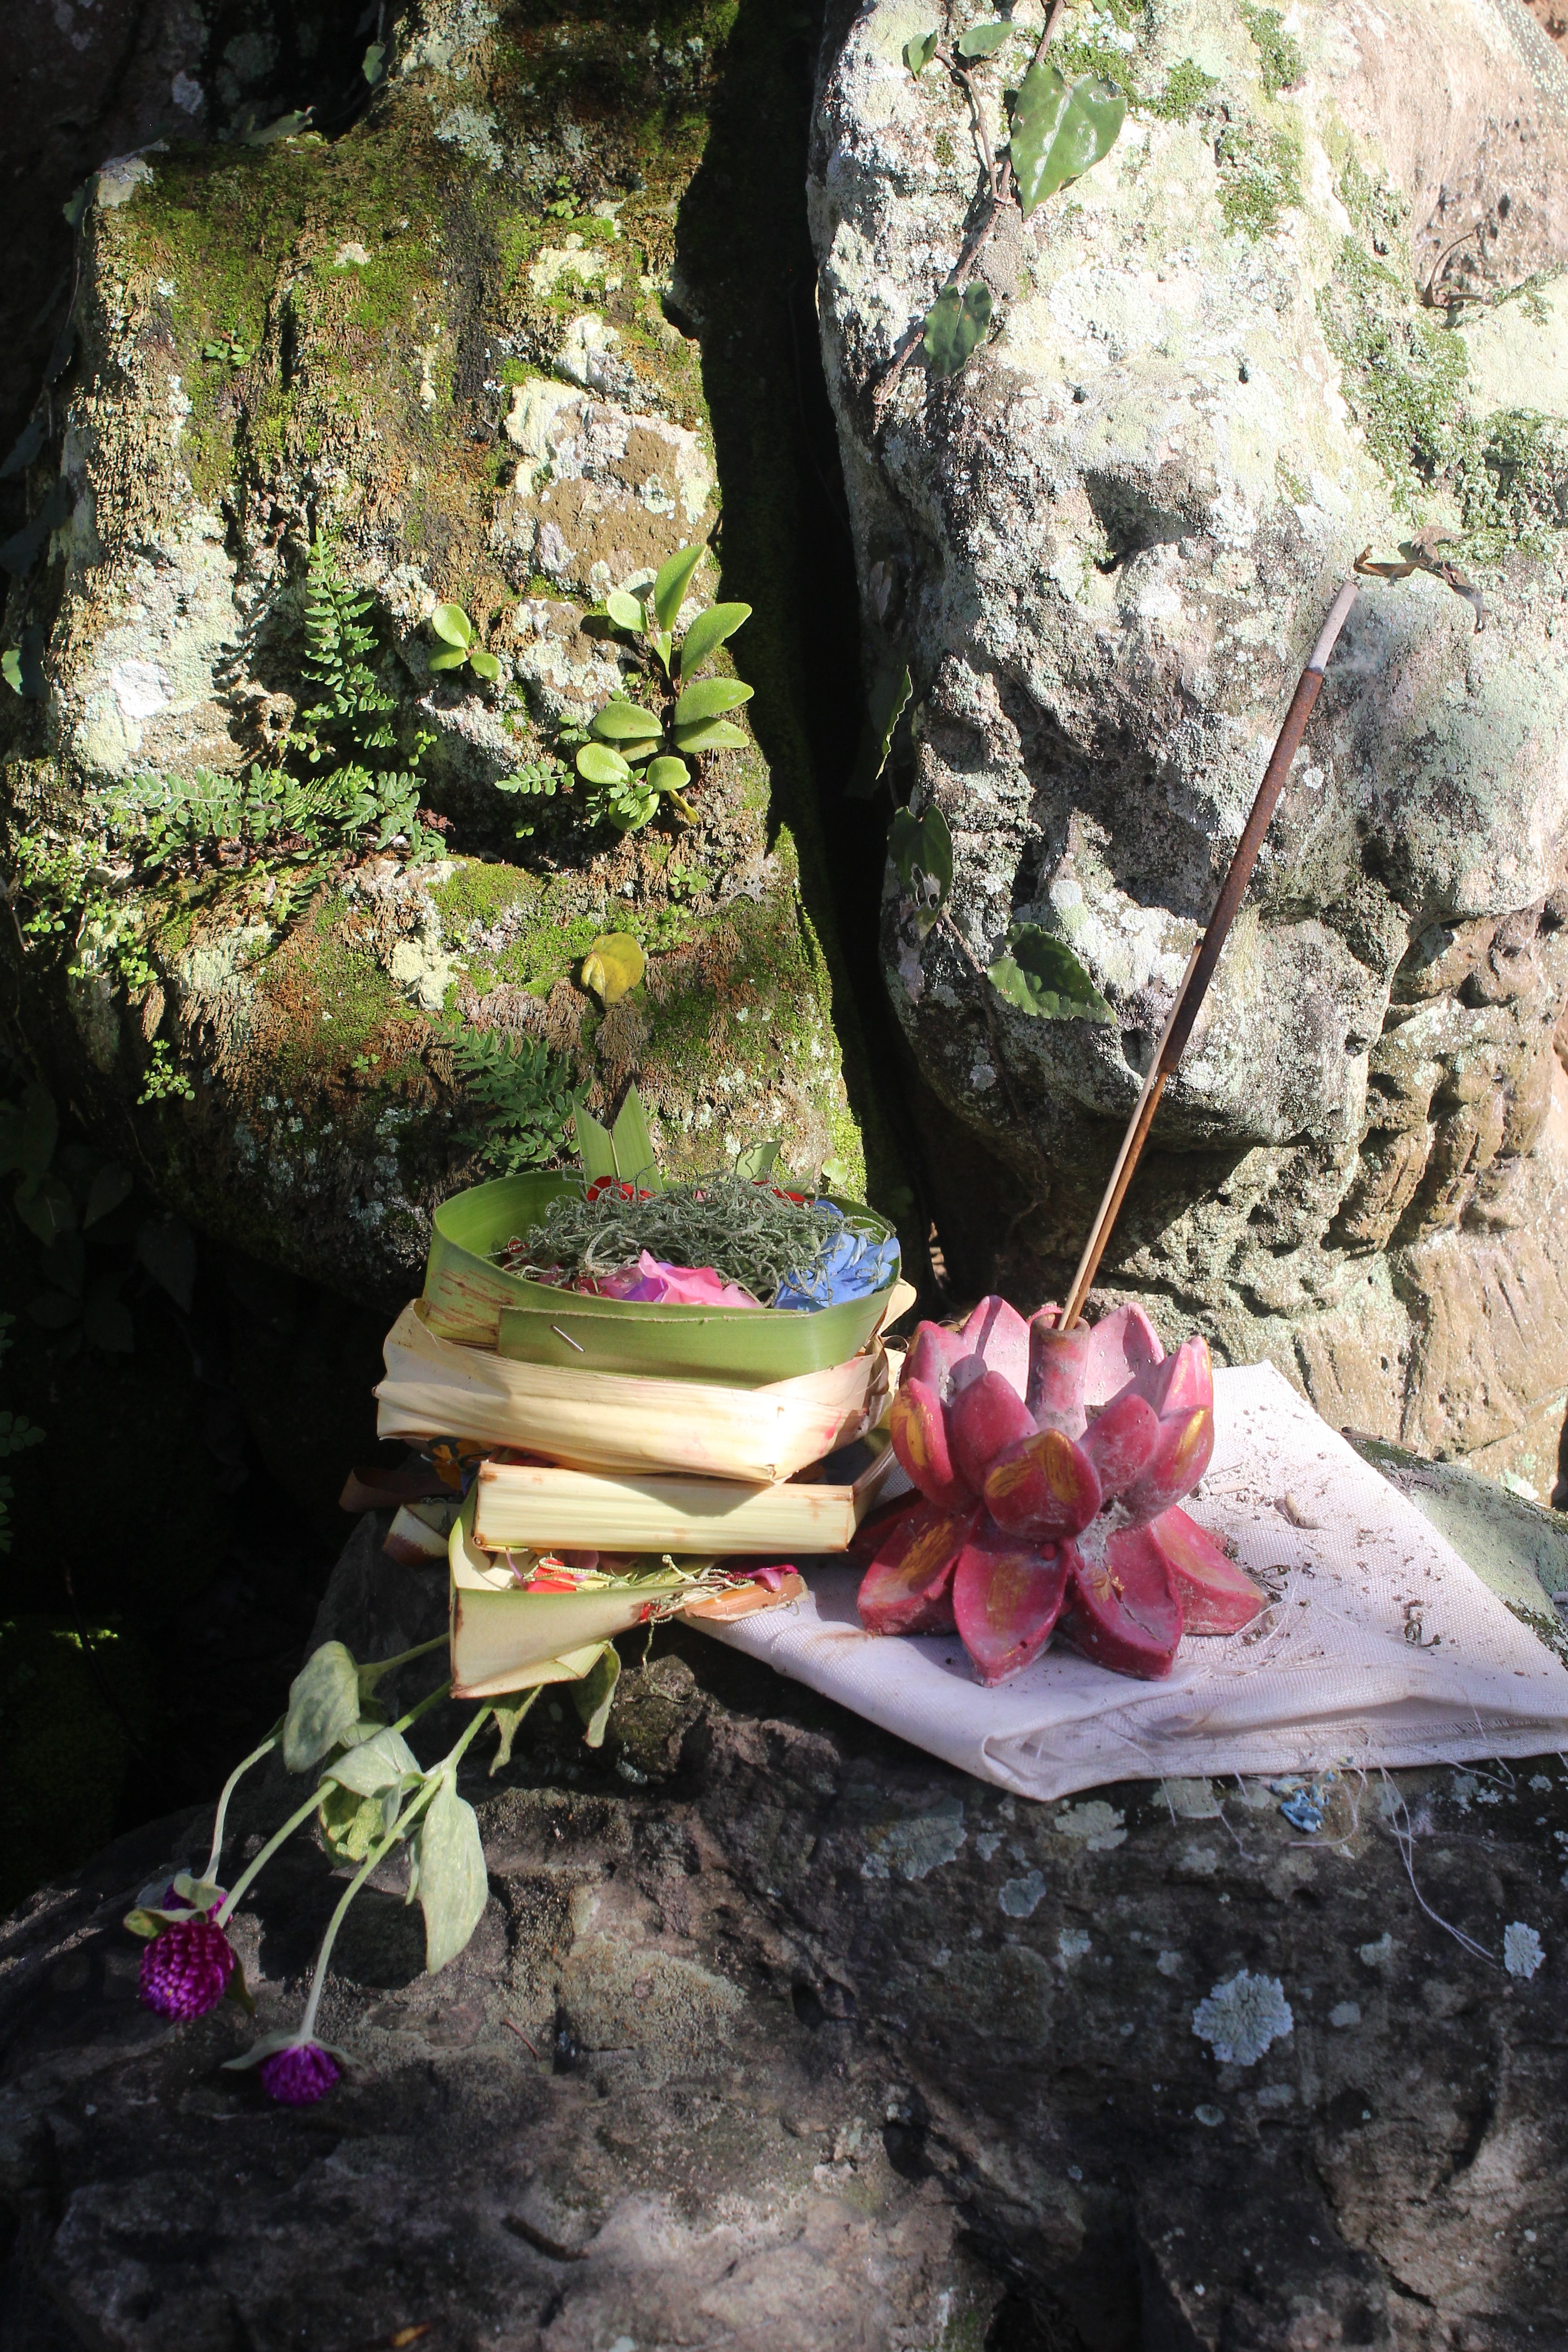 Offerings for the gods